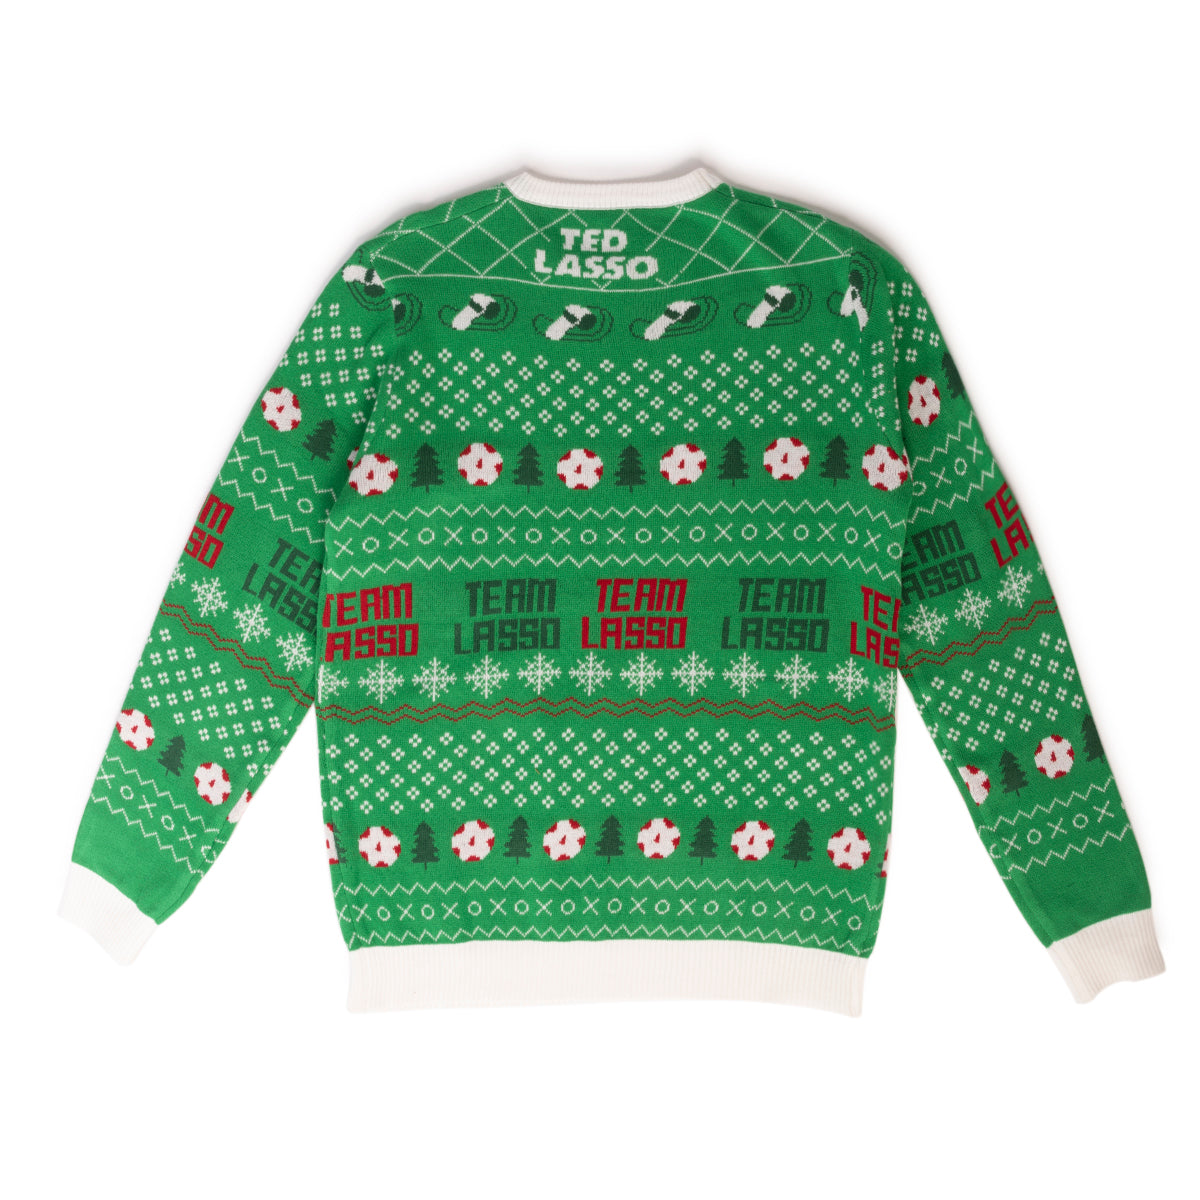 Ted Lasso Christmas Jumper